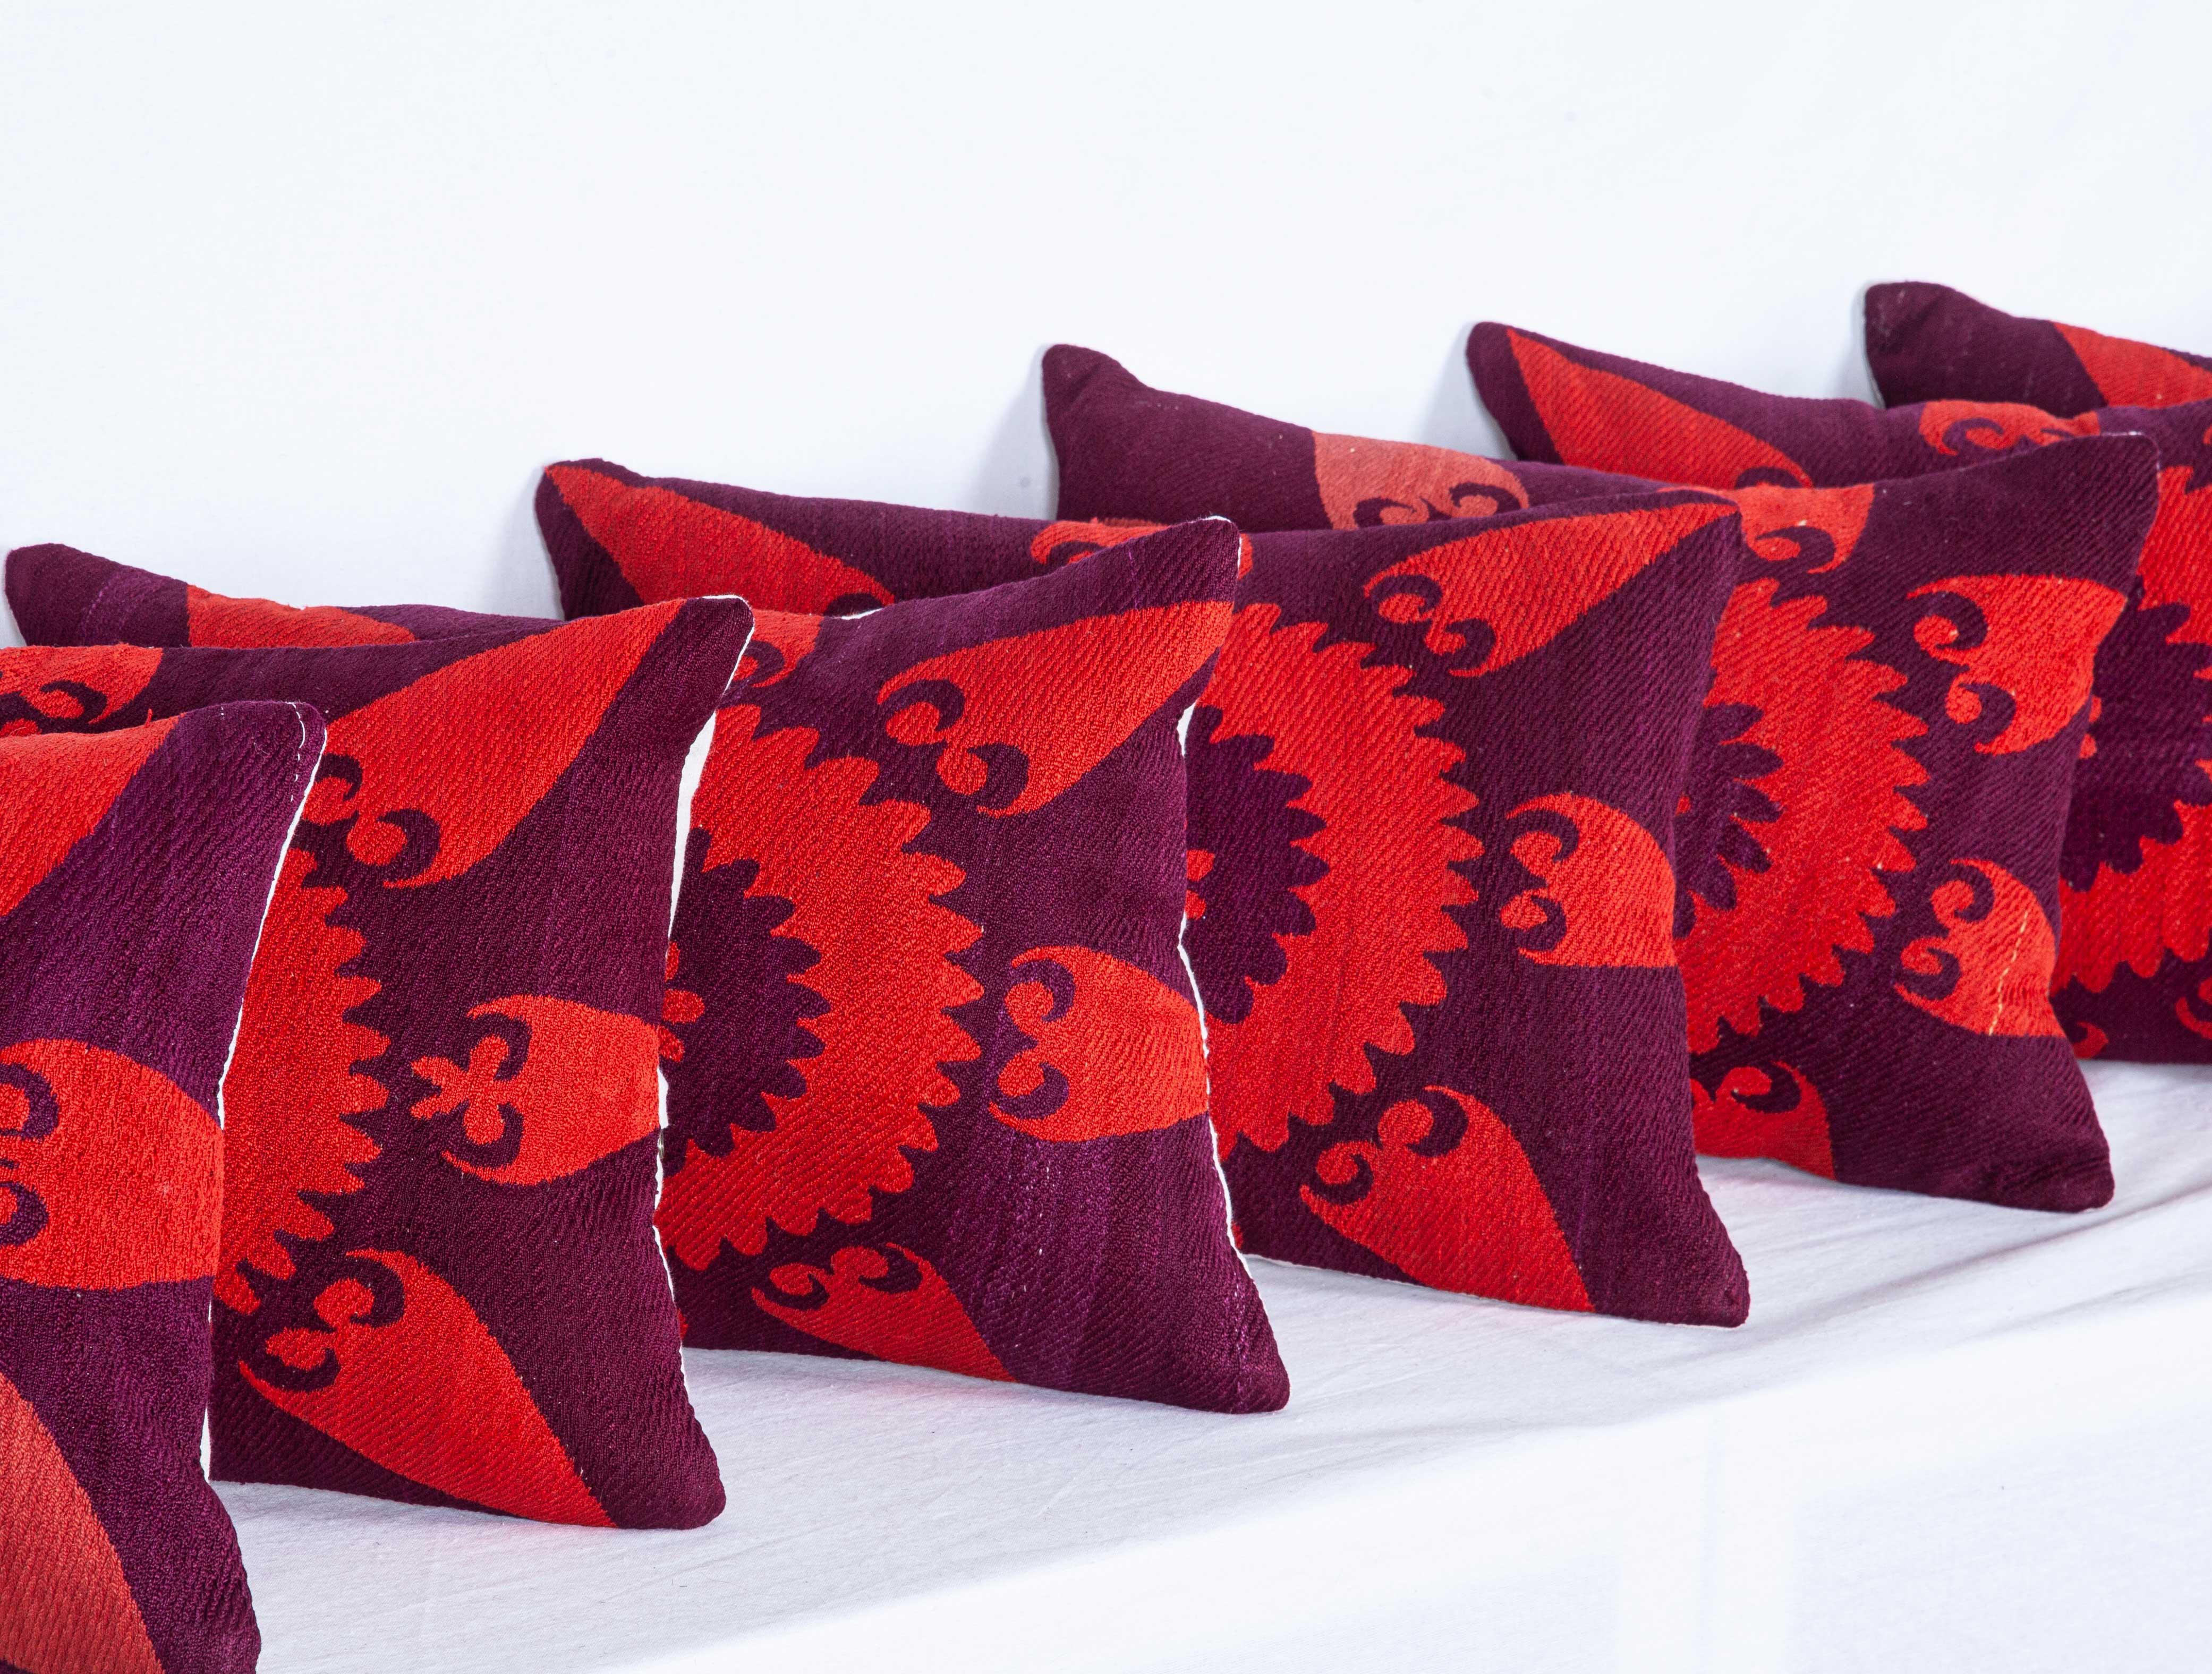 Embroidered Kidney Pillows Fashioned from an Early 20th Century Silk Samarkand Suzani For Sale